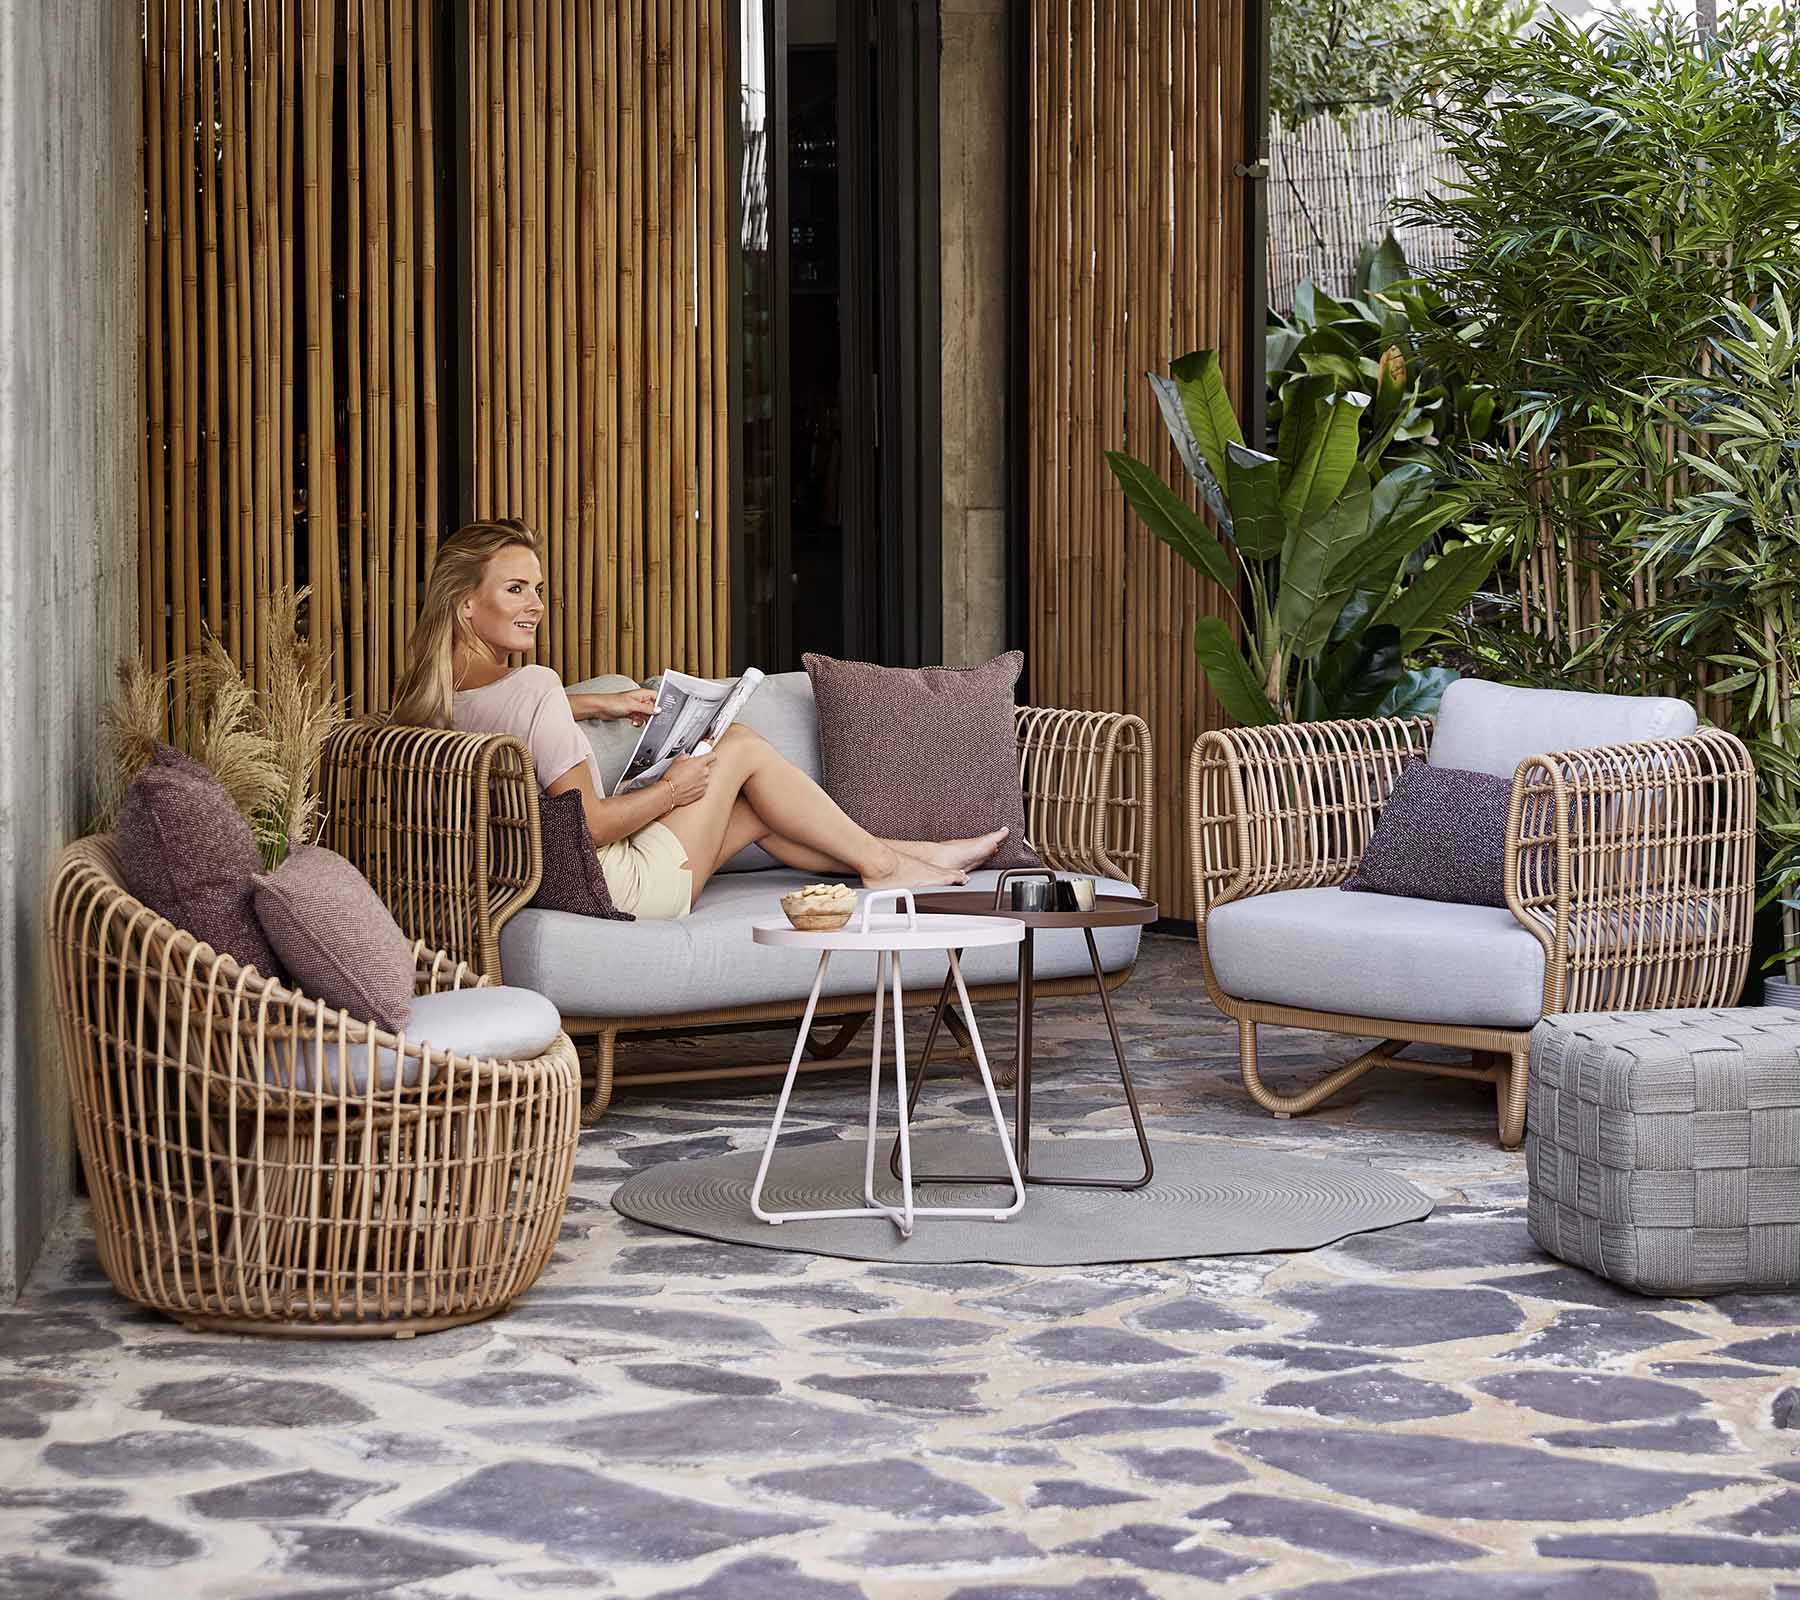 Boxhill's Nest Lounge Chair Lifestyle image with Nest 2-Seater Sofa, Nest Round Rattan Chair and a woman sitting and reading a magazine, at patio